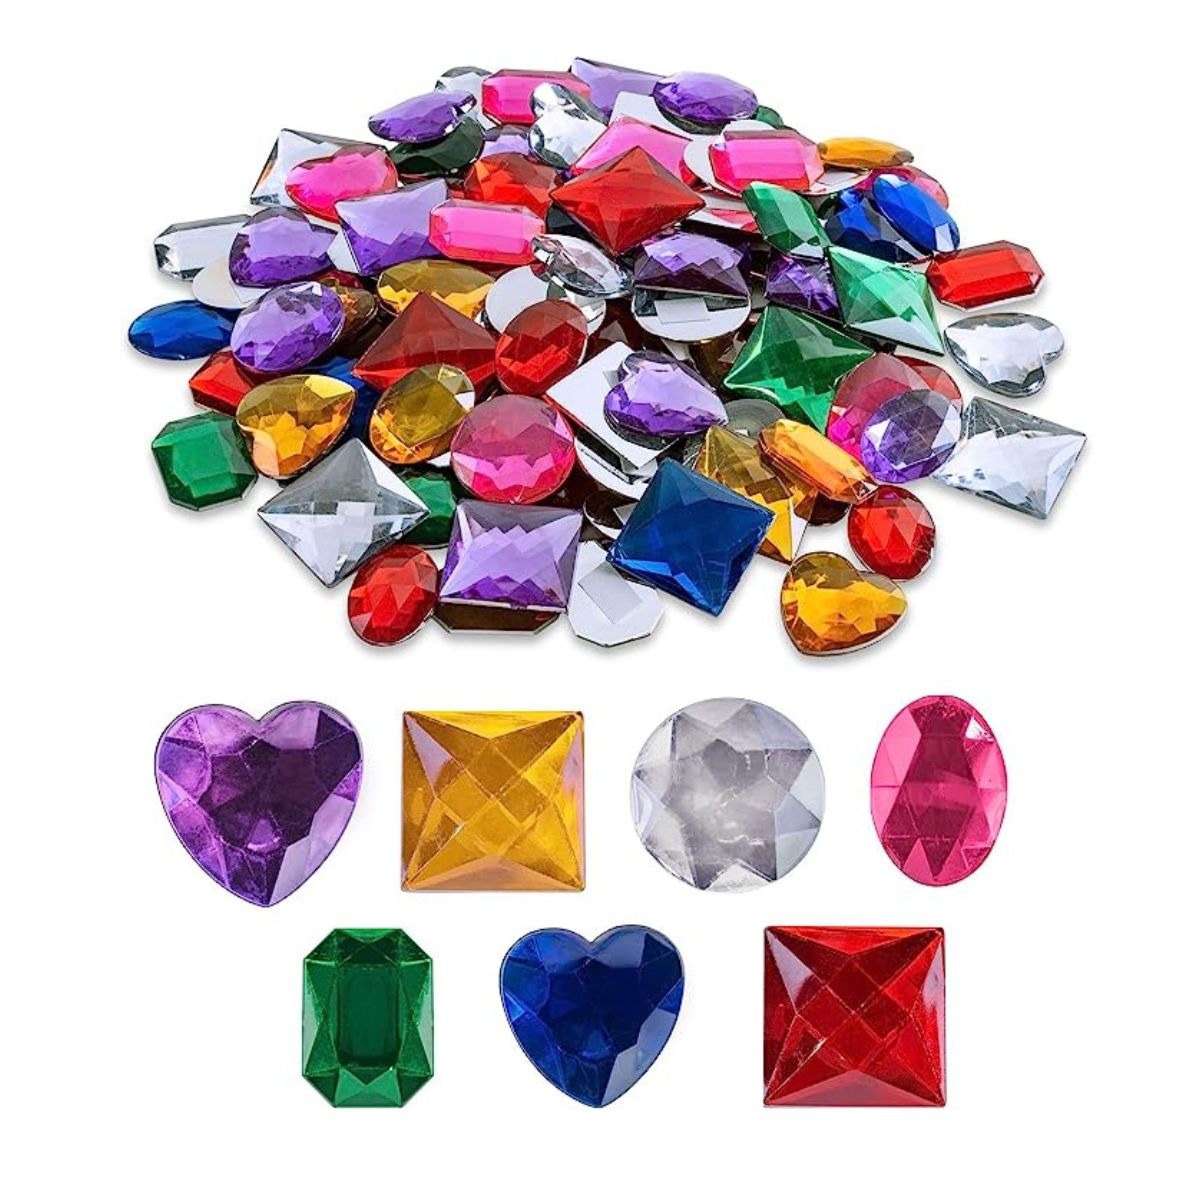 1-Inch Psychedelic Gems 100 pcs